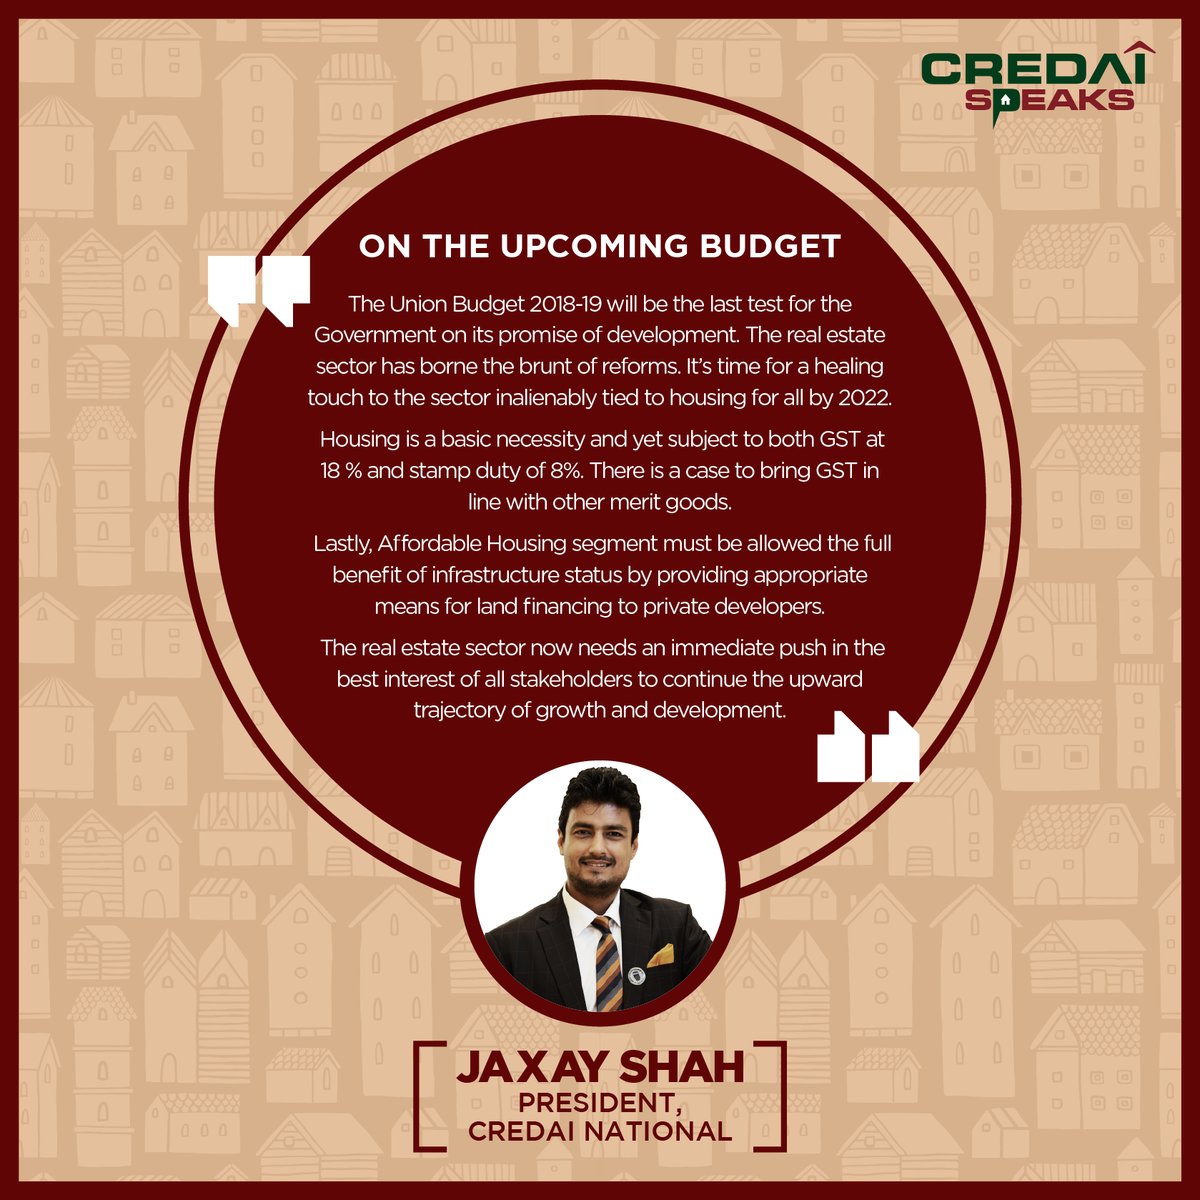 RT @CREDAINational: Here’s what our president @jaxayshah has to say about the upcoming #Budget2018. https://t.co/dwJ1kDhsKK